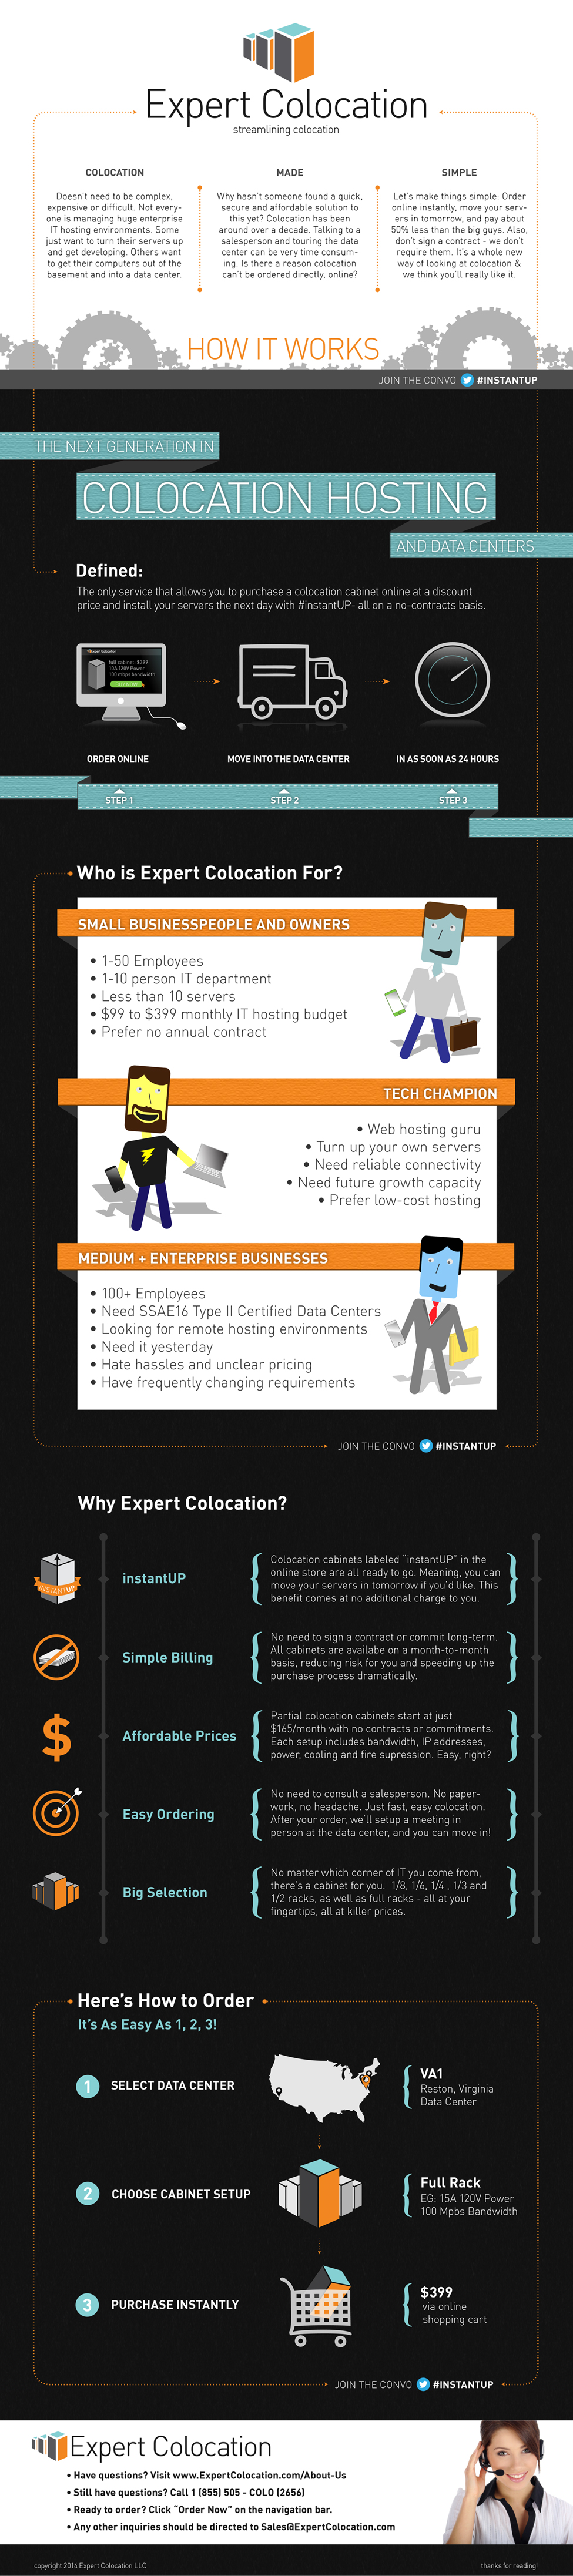 How Expert Colocation Works Infographic